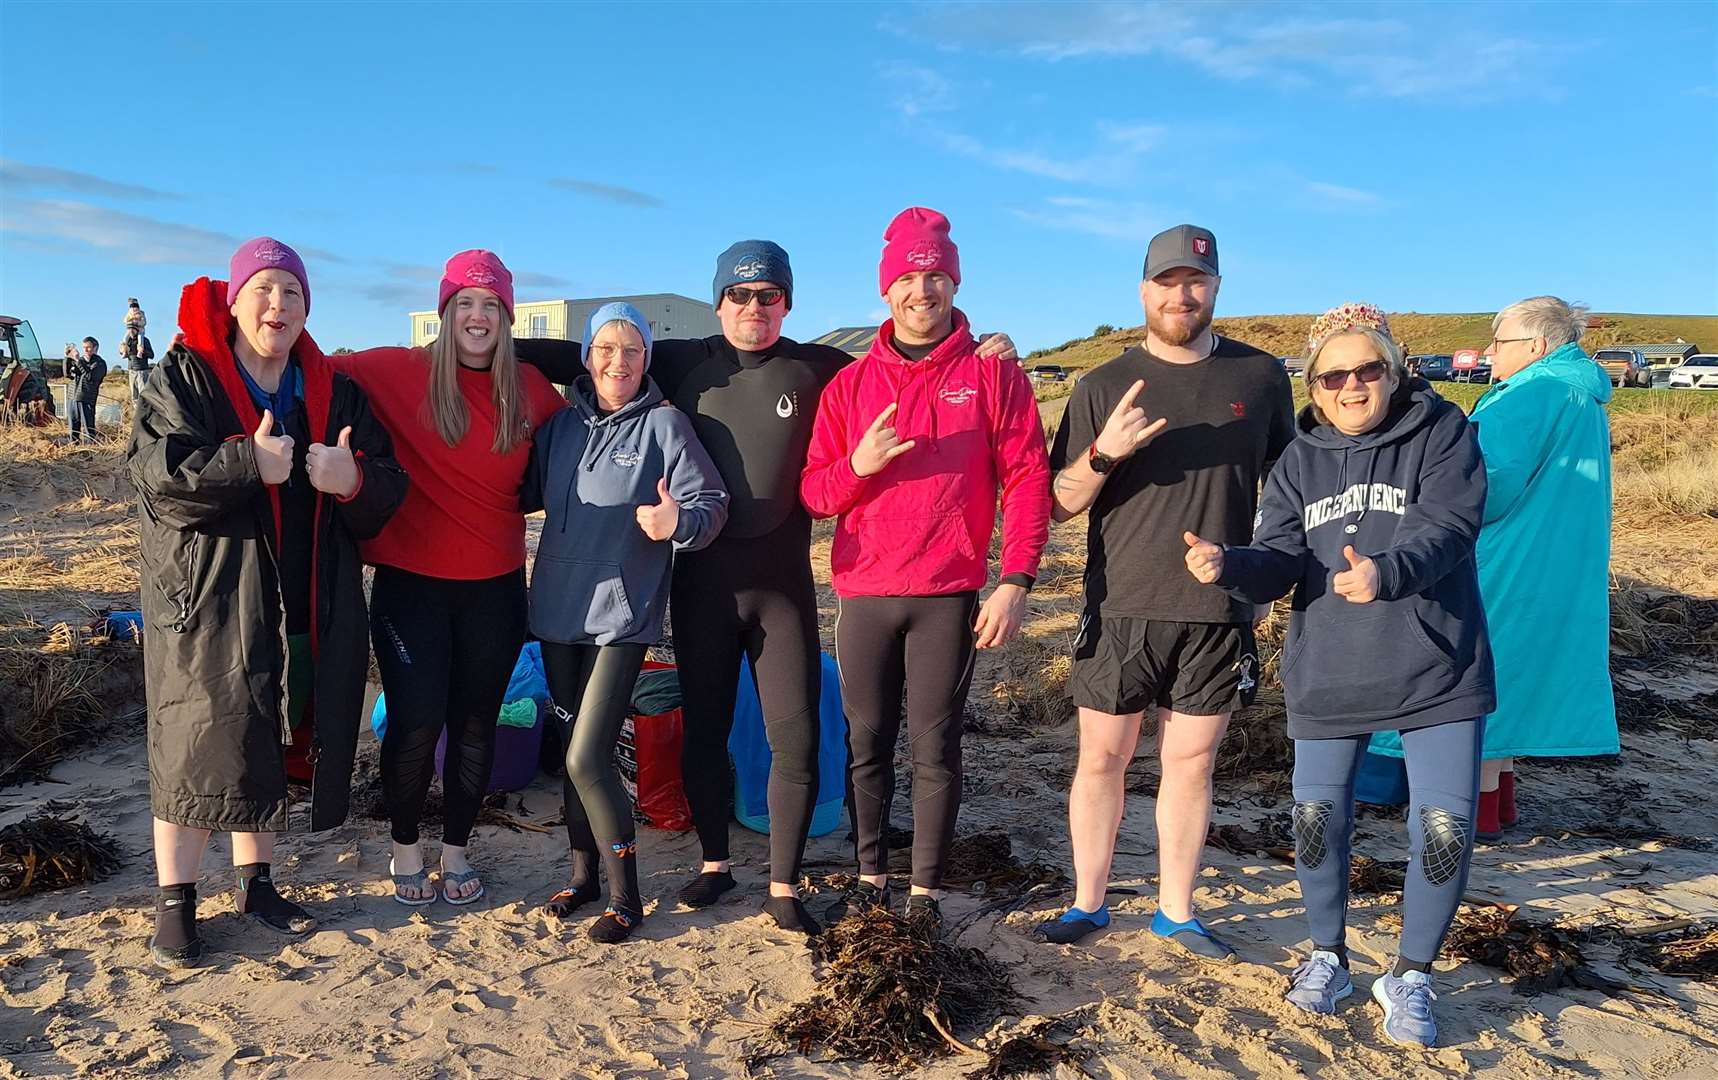 Members of Dornoch Dookers Cold Water Group, from left, Sam Le Gallez, Laura Mayo, Helen Gardener, Martin Sloan, Michael Sloan, Hugh Mackay and Hazel Maclean. The group was formed over a year ago by Hugh Mackay of Dornoch and is run by Rose and Martin Sloan of Clashmore. Dornoch Dookers meet every Sunday either at Dornoch or Embo beach. Members range in age from five to 86 and more members would be welcome. Rose Sloan said: "It makes you feel like a million dollars. You come out of the water and you are set for the day." The group have a Facebook page.